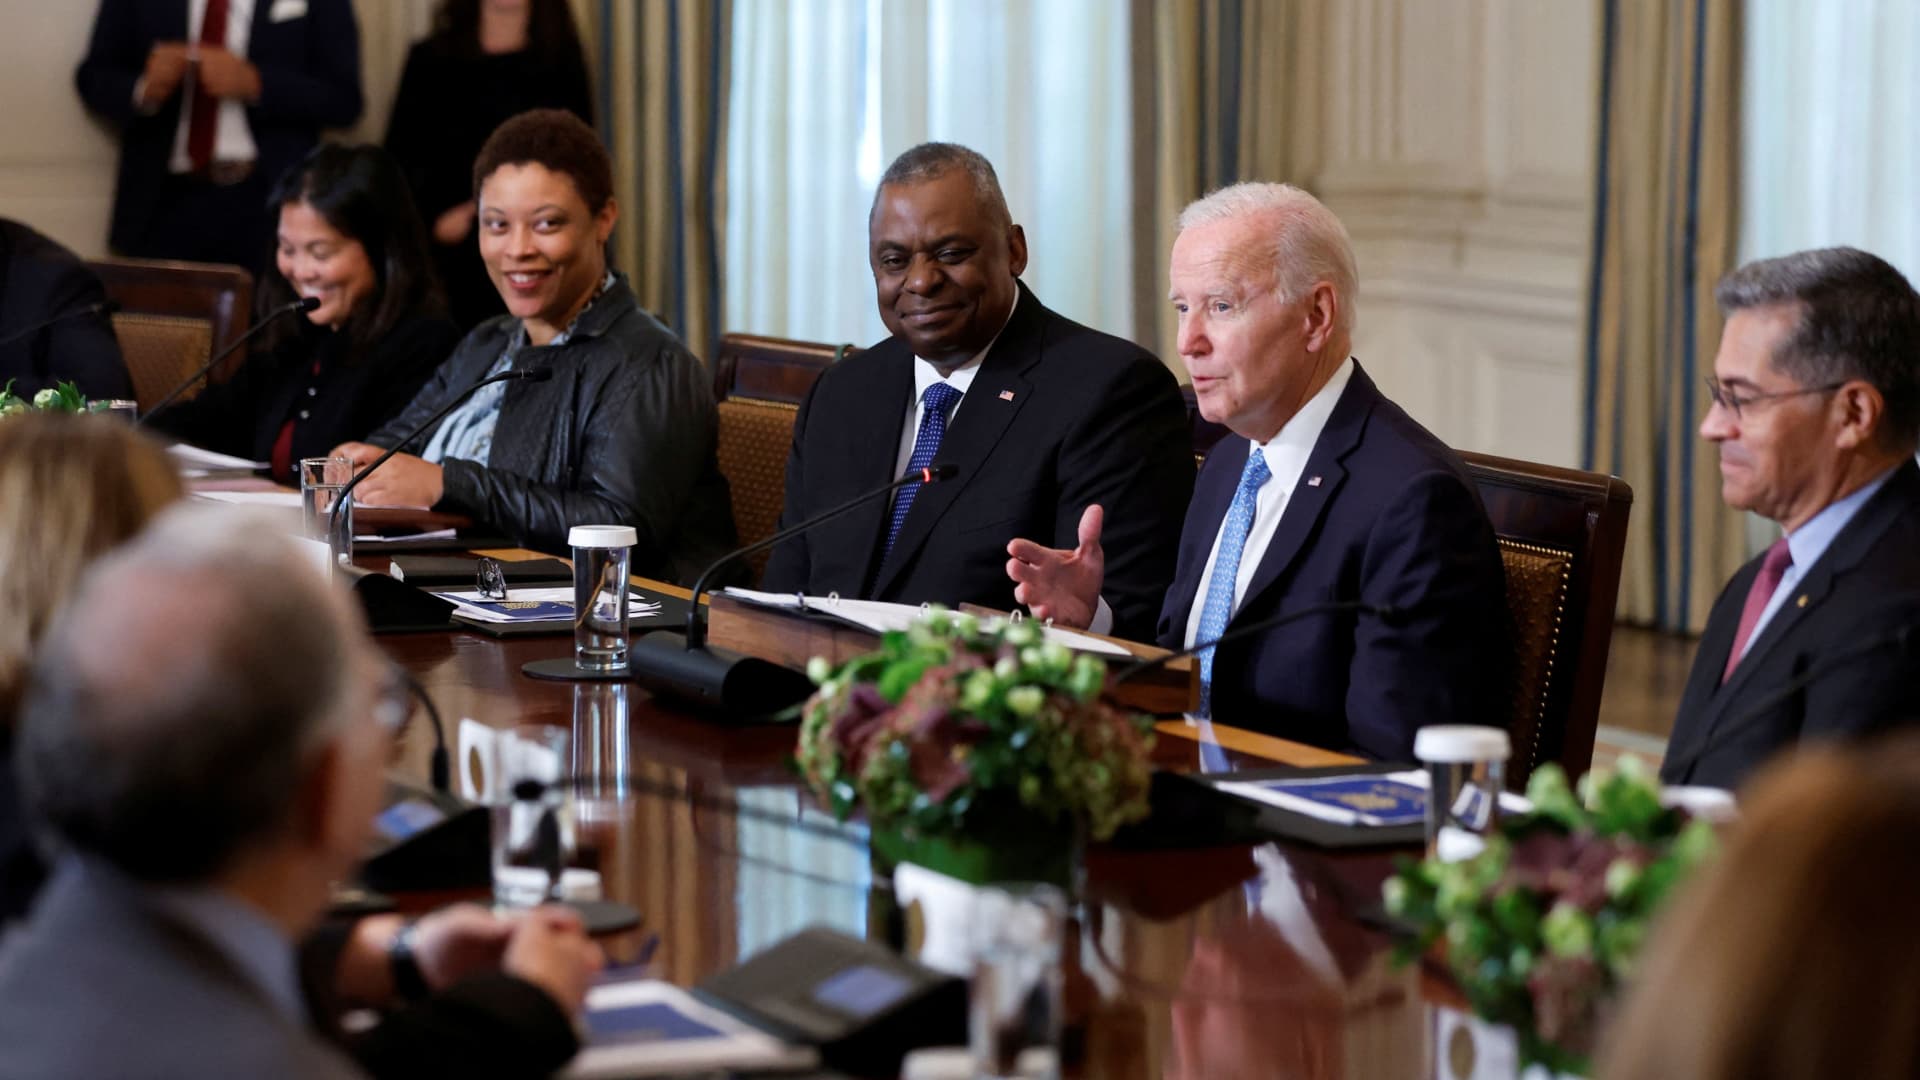 U.S. President Joe Biden, seated between Defense Secretary Lloyd Austin and Secretary of Health and Human Services (HHS) Xavier Becerra, delivers remarks at a meeting of the White House Competition Council in the State Dining Room of the White House in Washington, September 26, 2022.